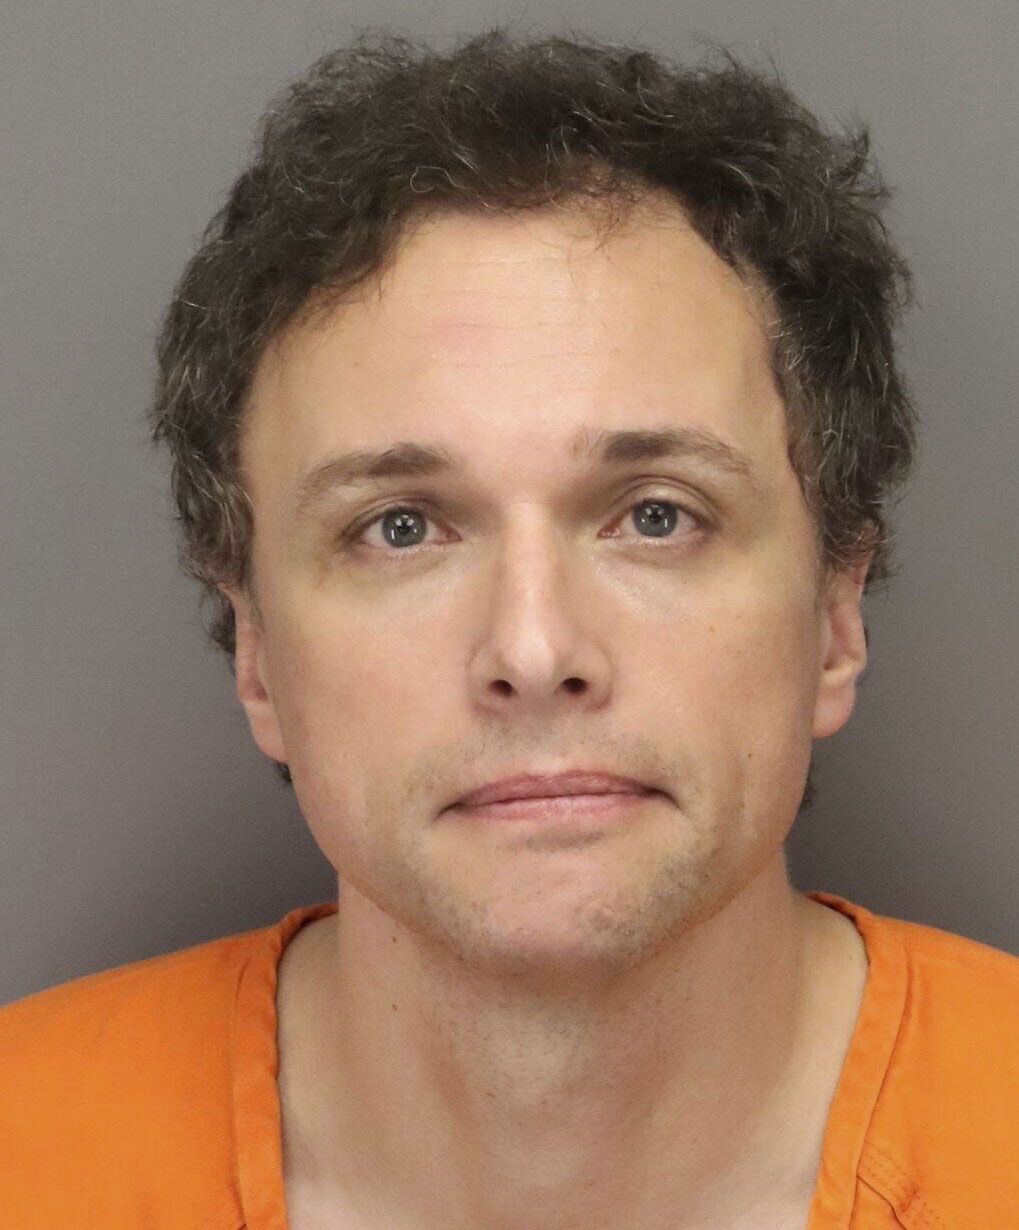 Mandatory Credit: Photo by Uncredited/AP/Shutterstock (13846583a) This photo provided by the Pinellas County Sheriff's Office shows Dr. Tomasz Kosowski, who was arrested on a first-degree murder charge, by Largo Police, in Florida. The Tampa-area plastic surgeon is accused of killing a lawyer missing since last week from a firm that represents former co-workers the doctor has been suing in a business dispute Attorney Missing Doctor Charged, United States - 25 Mar 2023